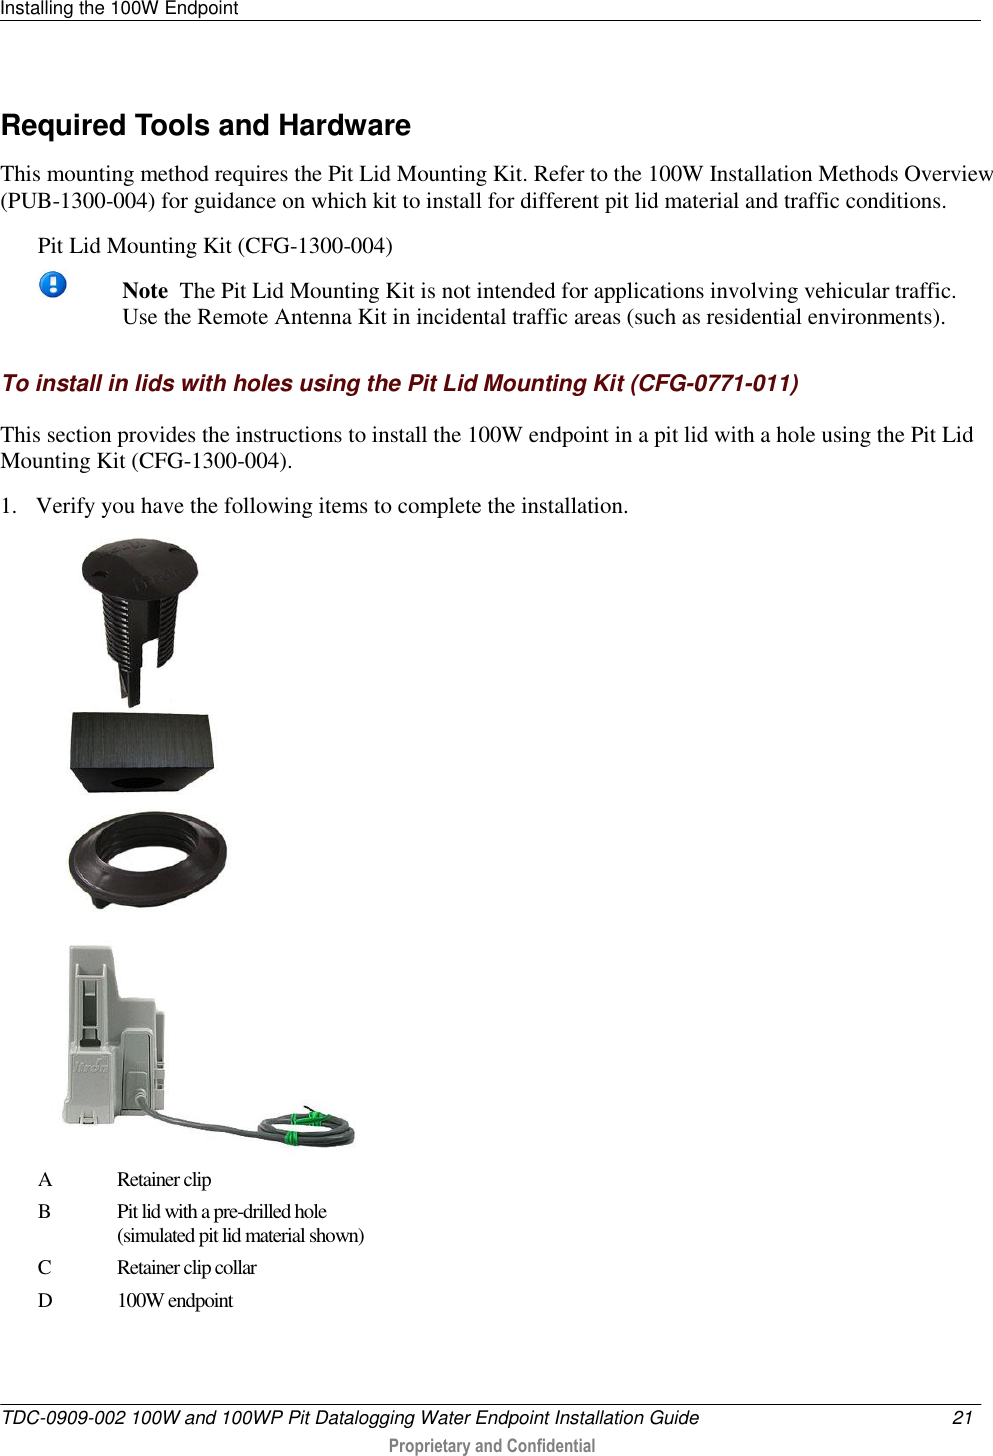 Installing the 100W Endpoint   TDC-0909-002 100W and 100WP Pit Datalogging Water Endpoint Installation Guide  21   Proprietary and Confidential     Required Tools and Hardware This mounting method requires the Pit Lid Mounting Kit. Refer to the 100W Installation Methods Overview (PUB-1300-004) for guidance on which kit to install for different pit lid material and traffic conditions. Pit Lid Mounting Kit (CFG-1300-004)    Note  The Pit Lid Mounting Kit is not intended for applications involving vehicular traffic. Use the Remote Antenna Kit in incidental traffic areas (such as residential environments).  To install in lids with holes using the Pit Lid Mounting Kit (CFG-0771-011) This section provides the instructions to install the 100W endpoint in a pit lid with a hole using the Pit Lid Mounting Kit (CFG-1300-004). 1. Verify you have the following items to complete the installation.  A Retainer clip  B Pit lid with a pre-drilled hole  (simulated pit lid material shown) C Retainer clip collar D 100W endpoint 